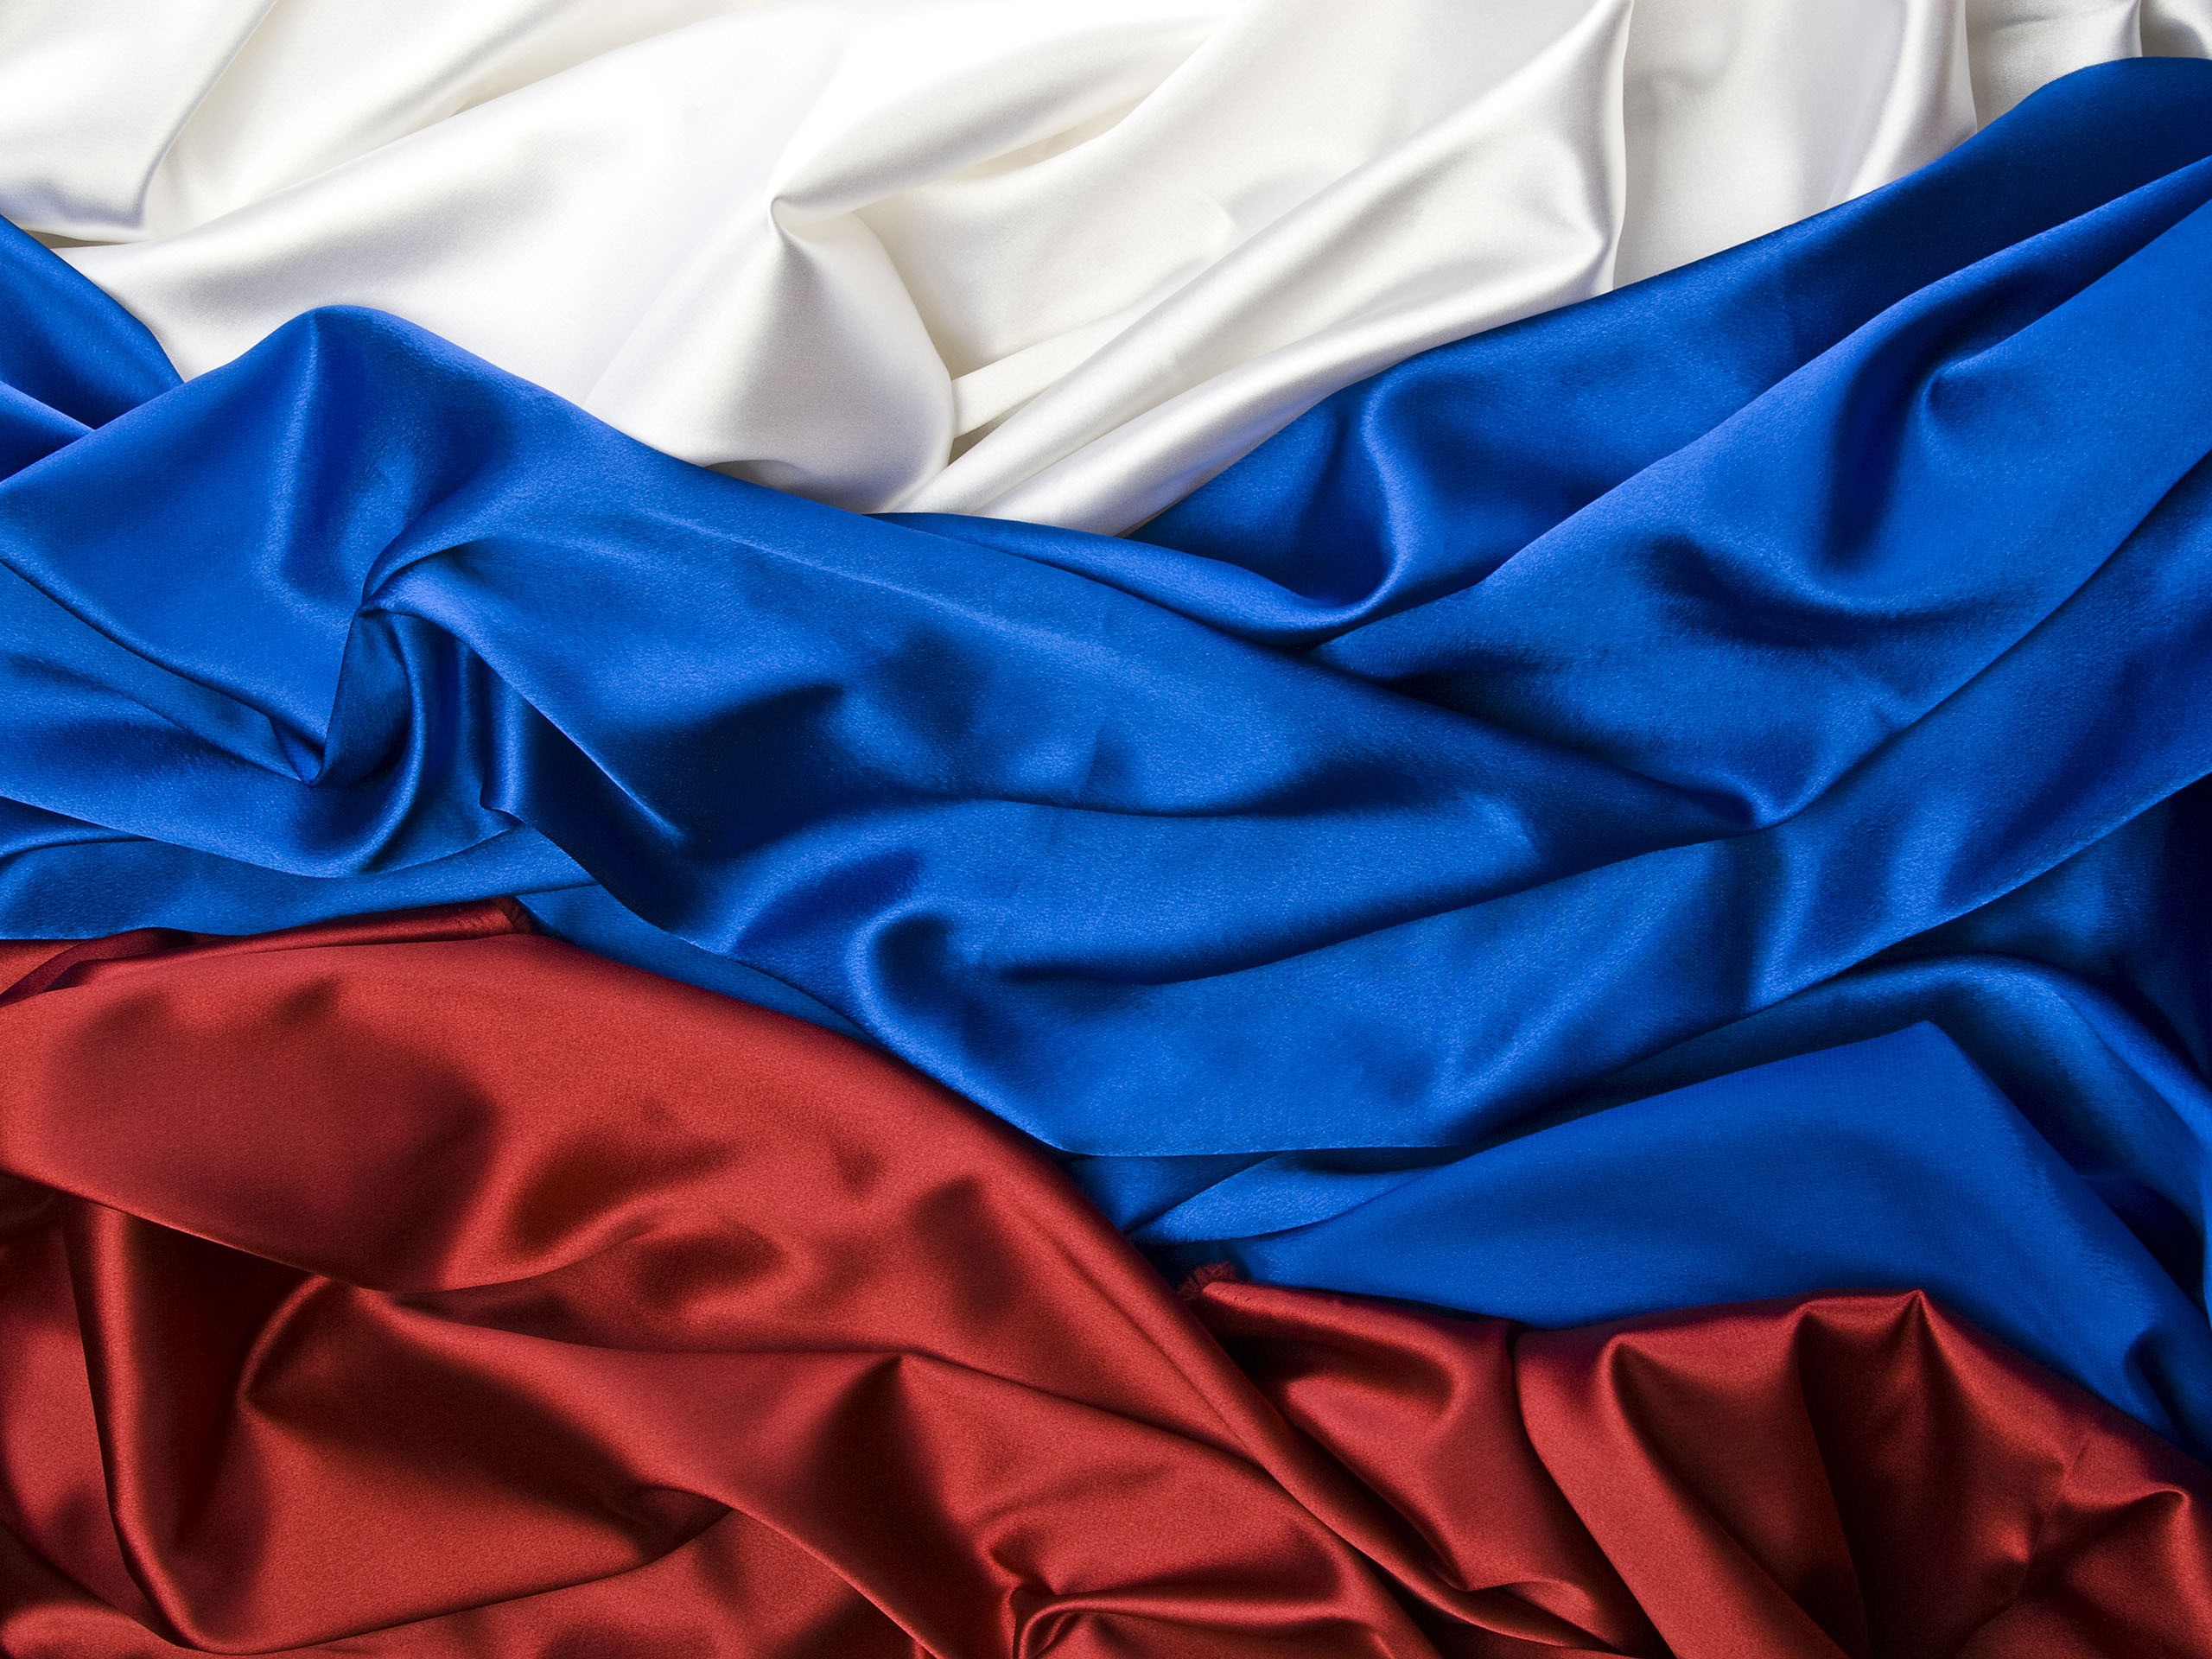 General 2560x1920 Russia flag white blue red